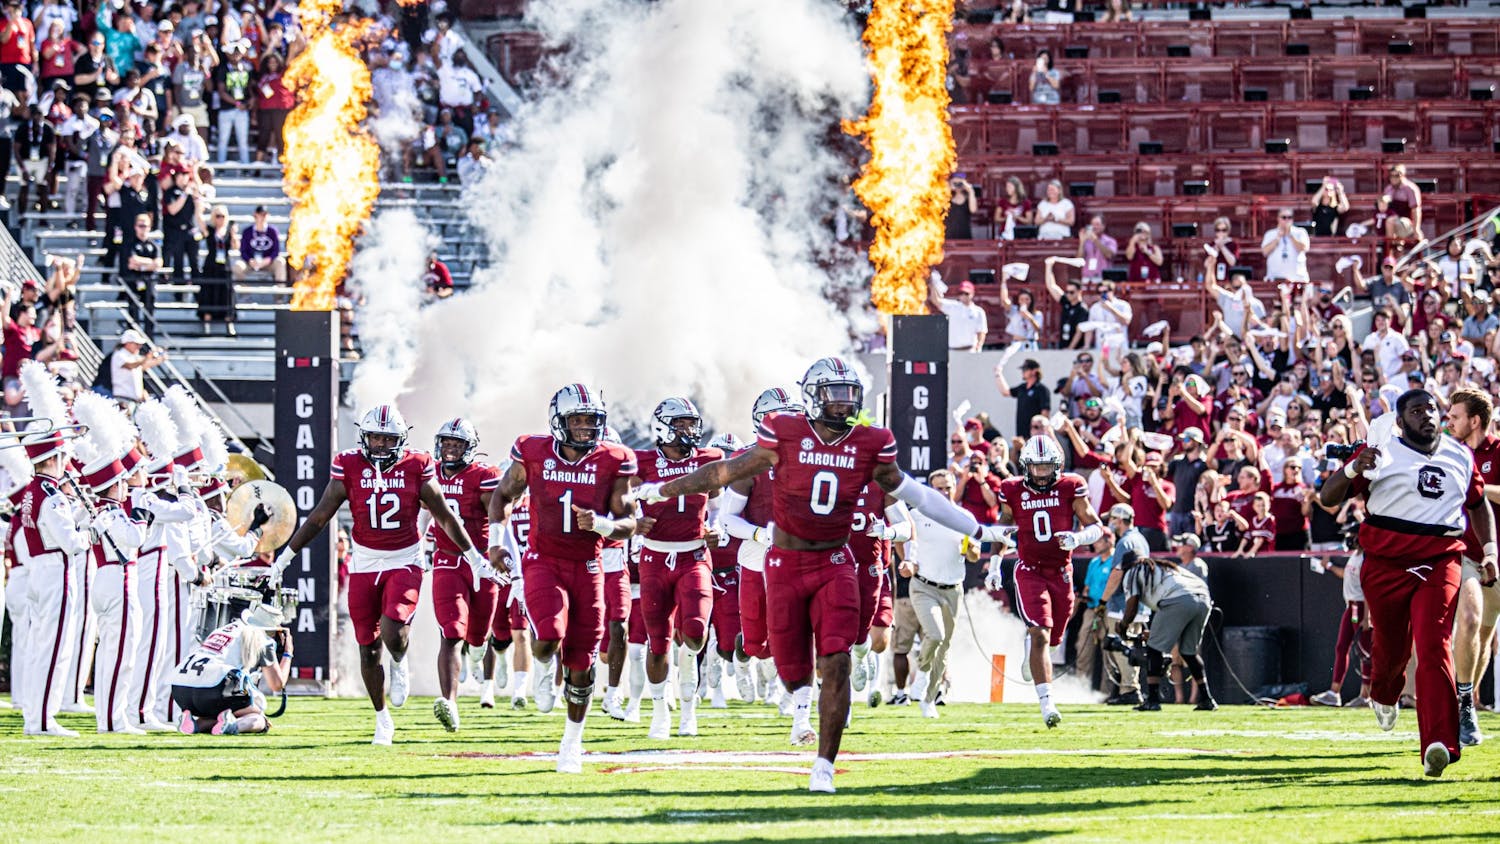 The Gamecock football team rushing the field for kick off at the Troy Football game Oct. 2, 2021, at Williams-Brice Stadium.&nbsp;